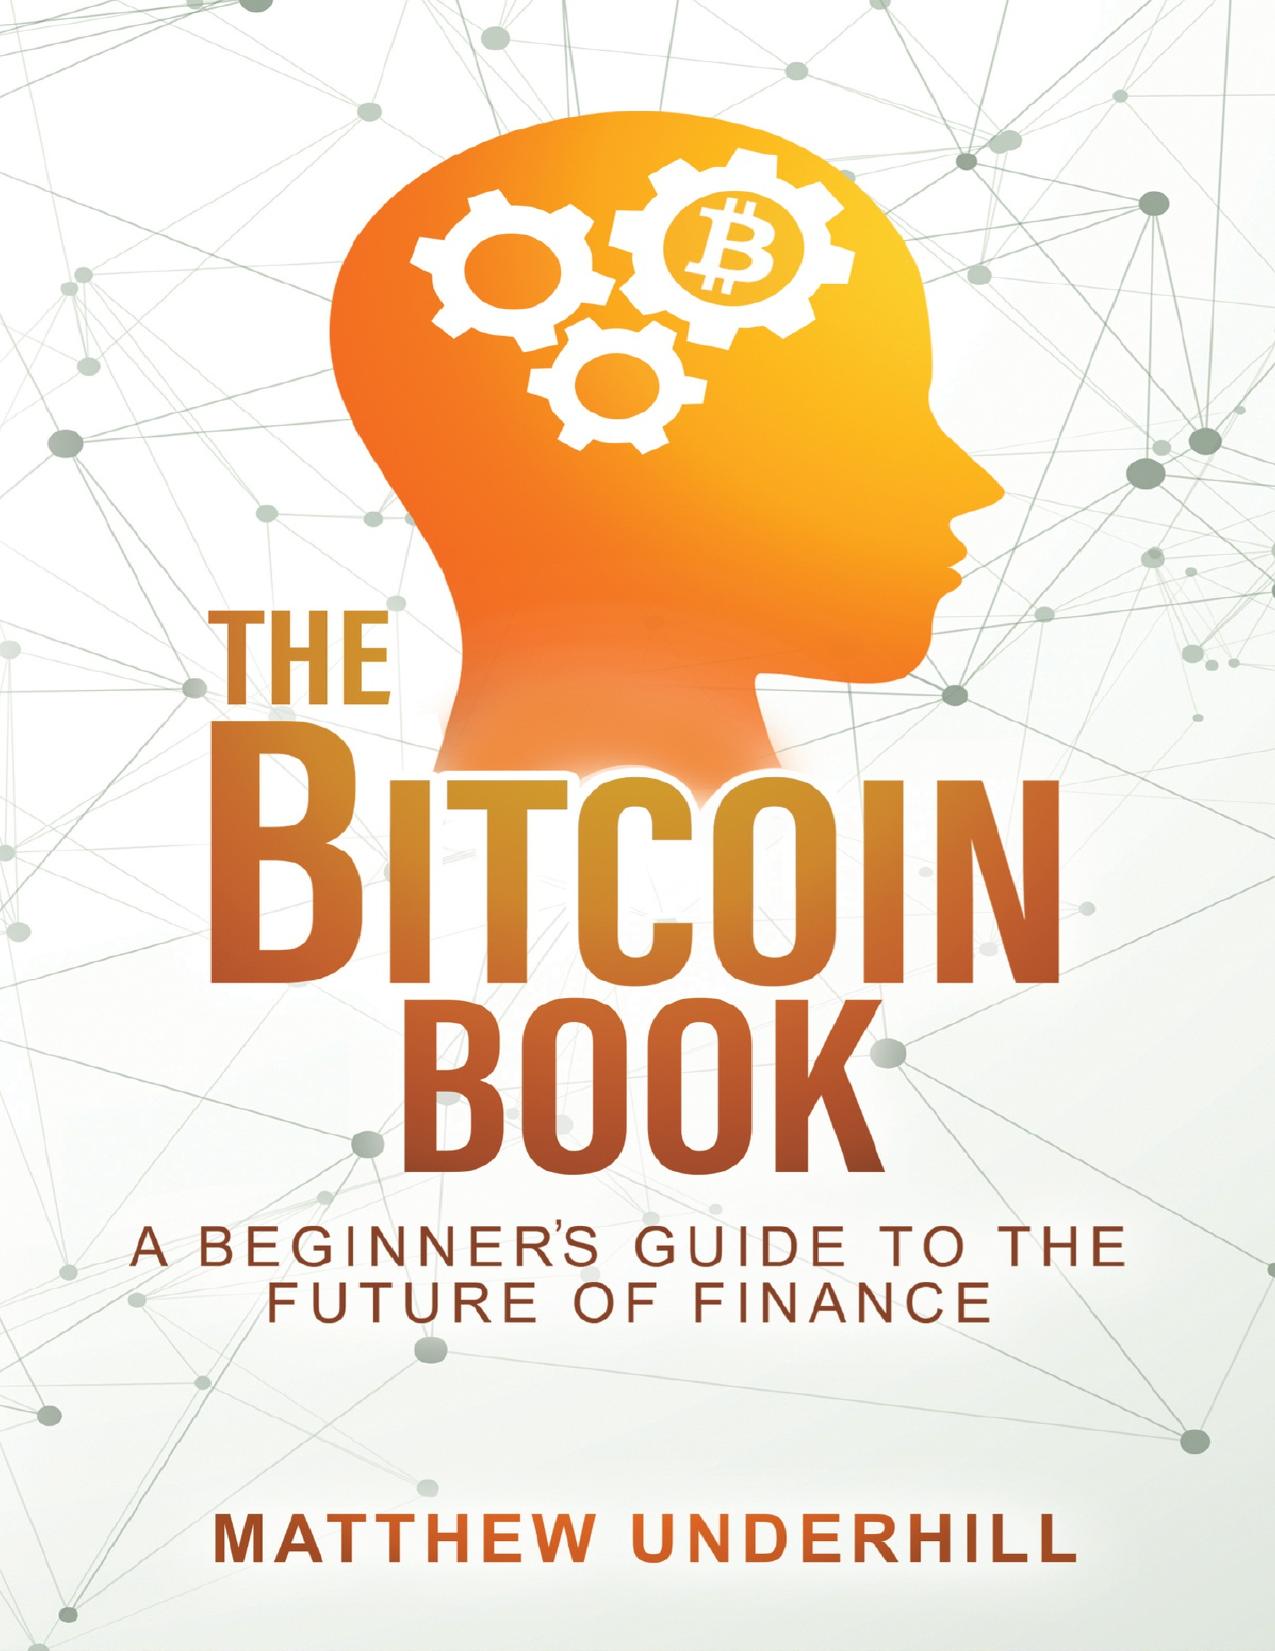 The Bitcoin Book: A Beginner's Guide to the Future of Finance by Underhill Matthew